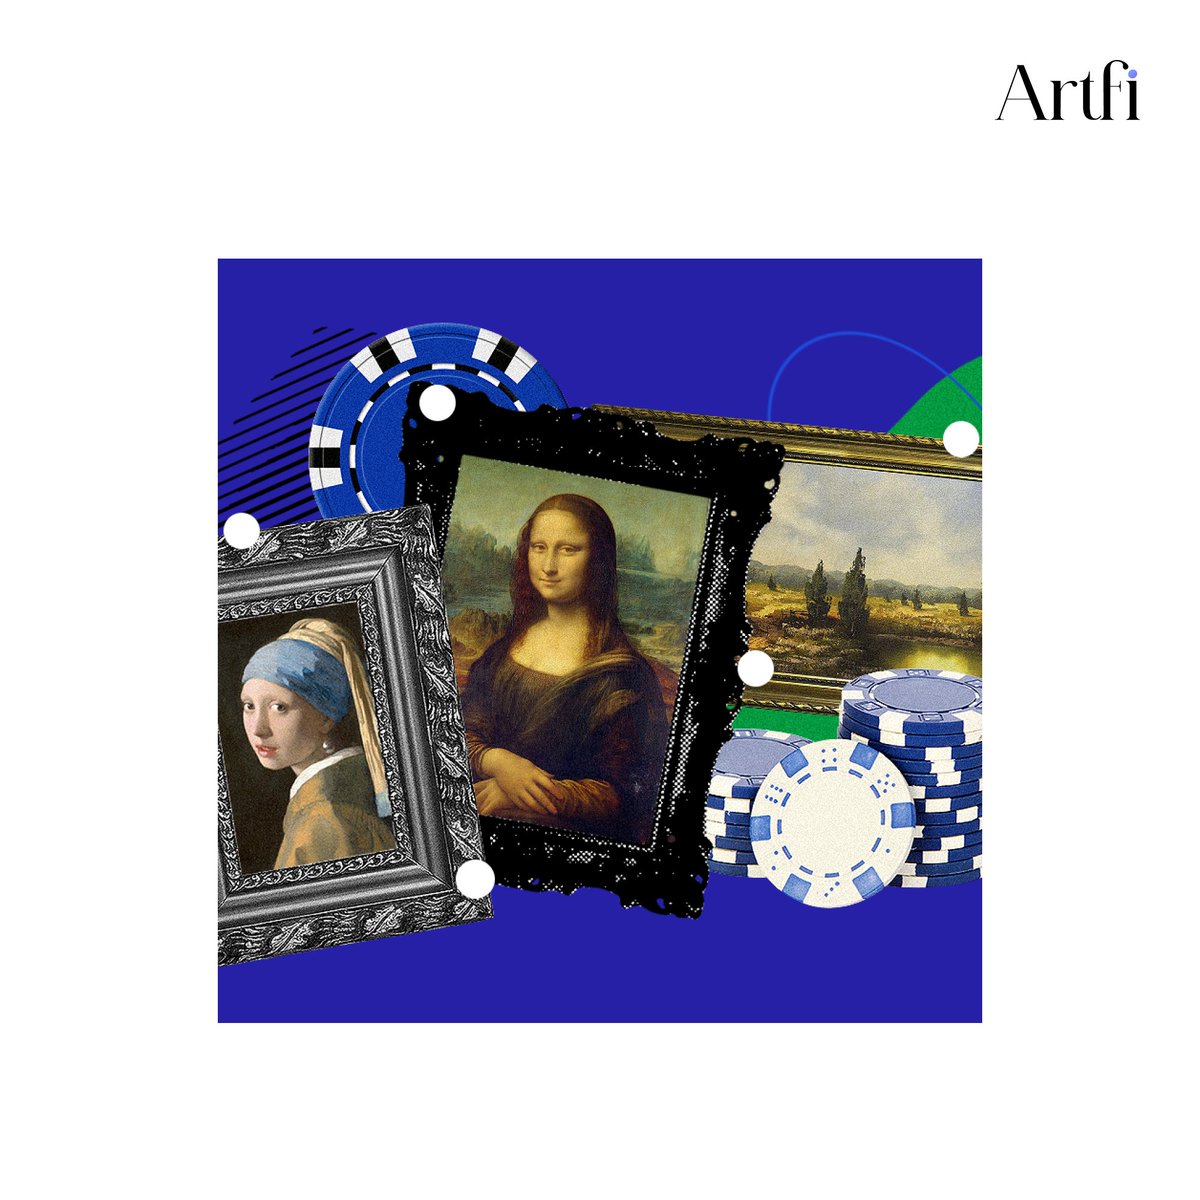 Investing in contemporary fine #art can be a rewarding experience, but the high cost of most artworks and limited access to insiders and made it difficult for most people to enter the art market. #Artfi is changing that.